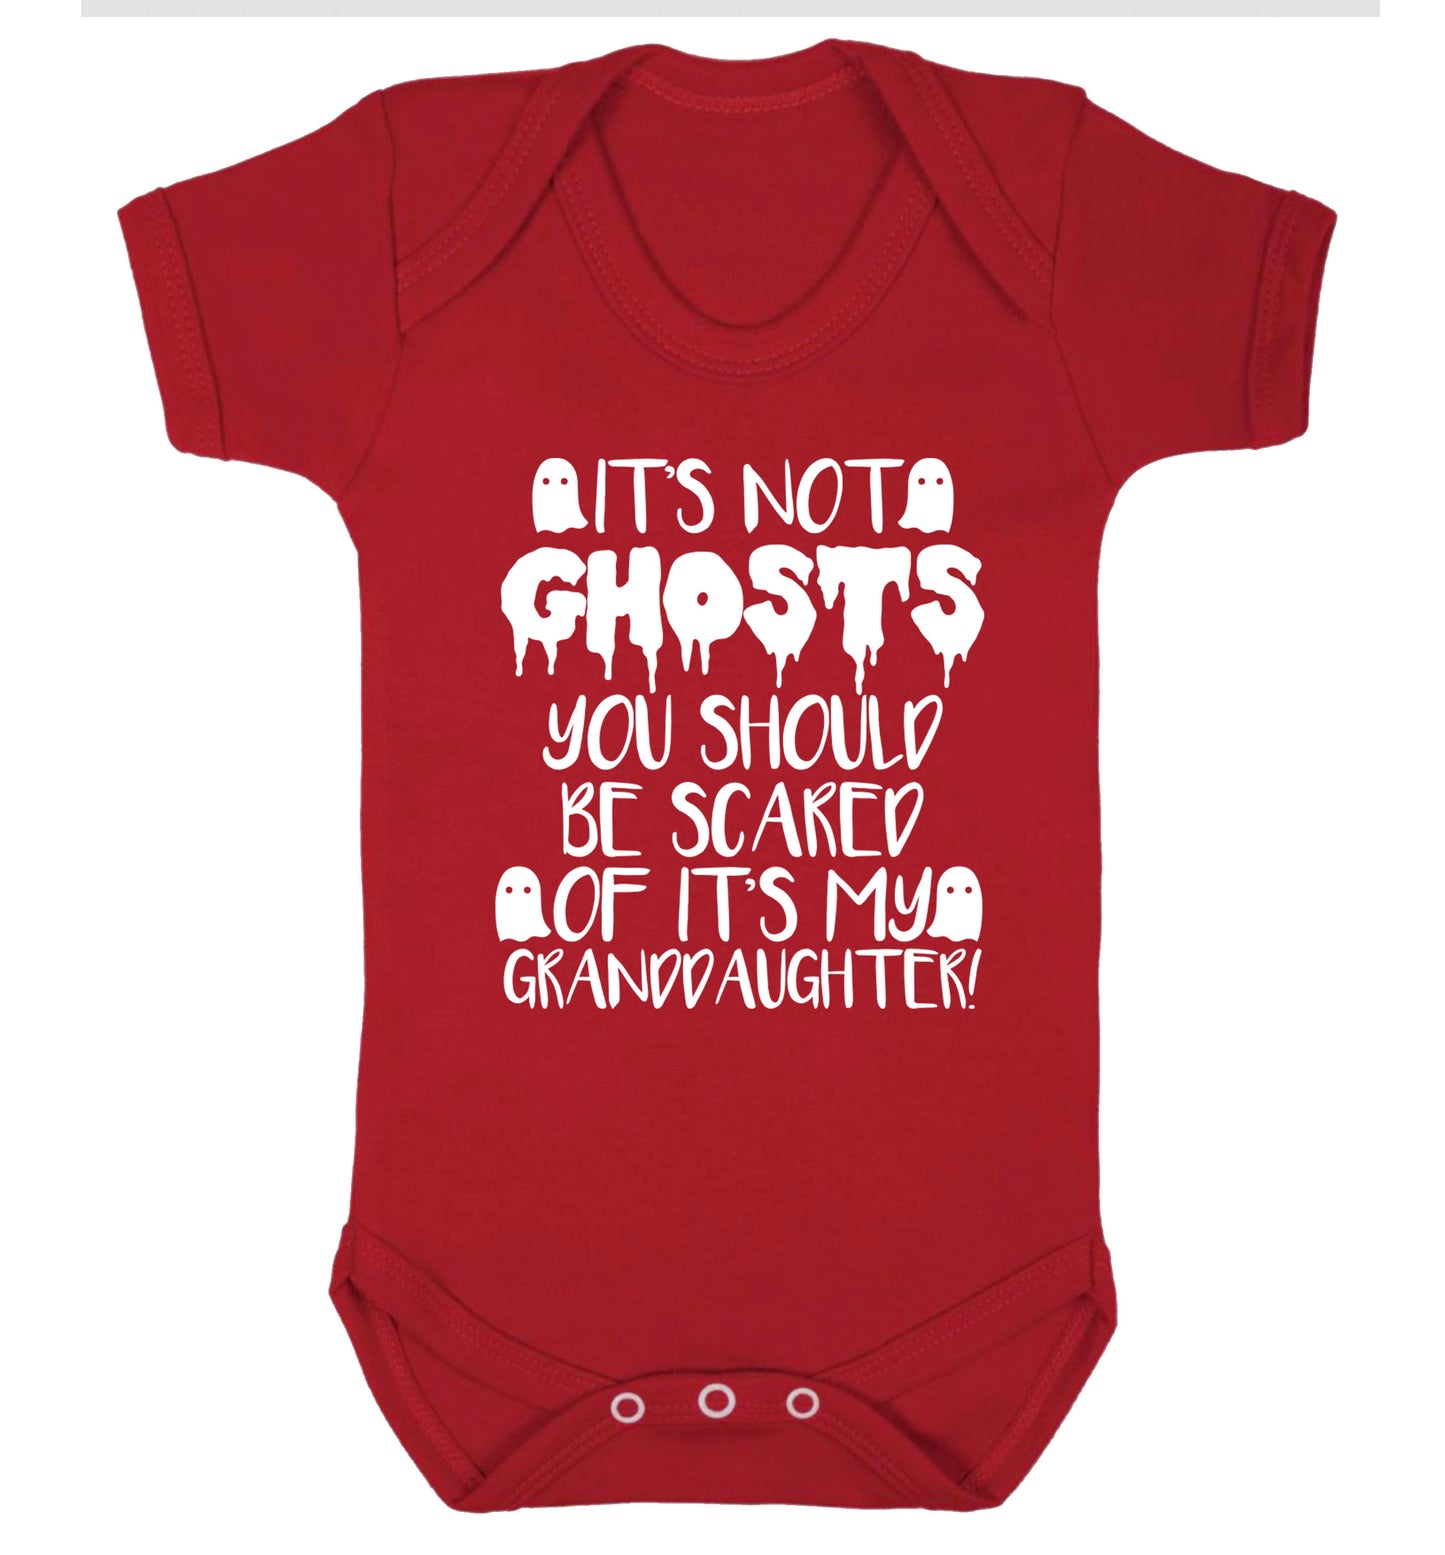 It's not ghosts you should be scared of it's my granddaughter! Baby Vest red 18-24 months